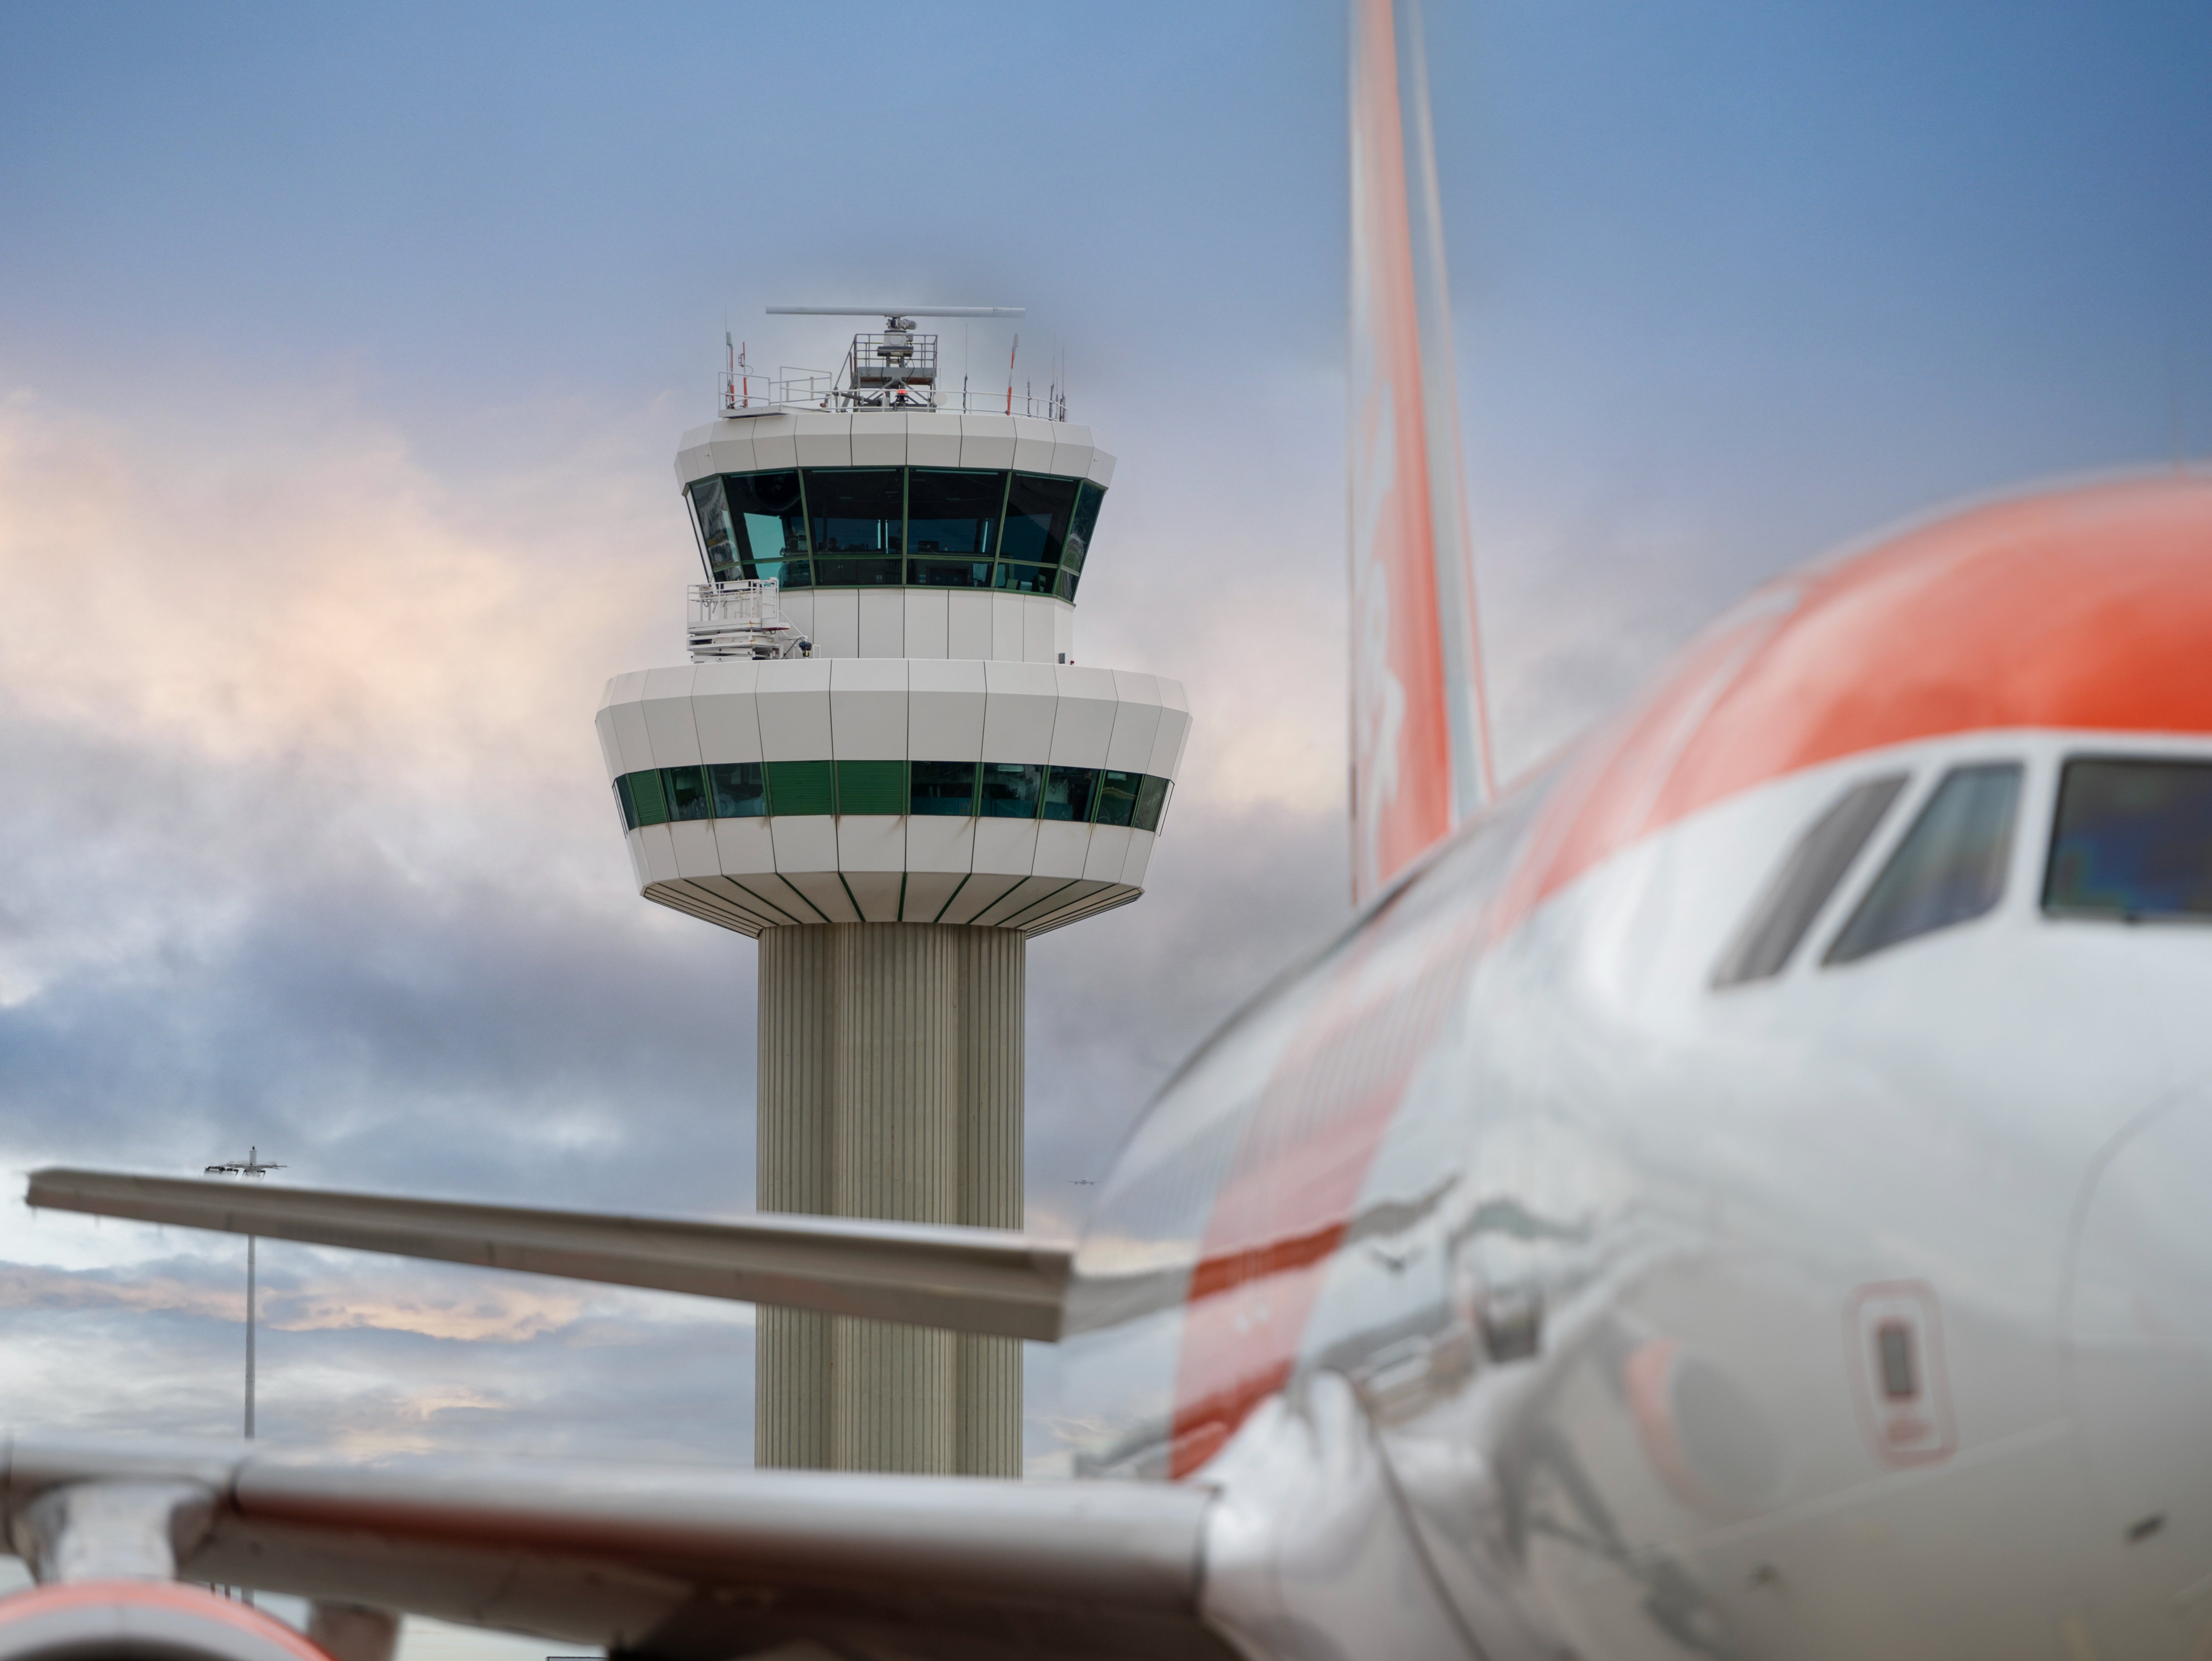 Power tower: easyJet Airbus passes Gatwick airport control tower